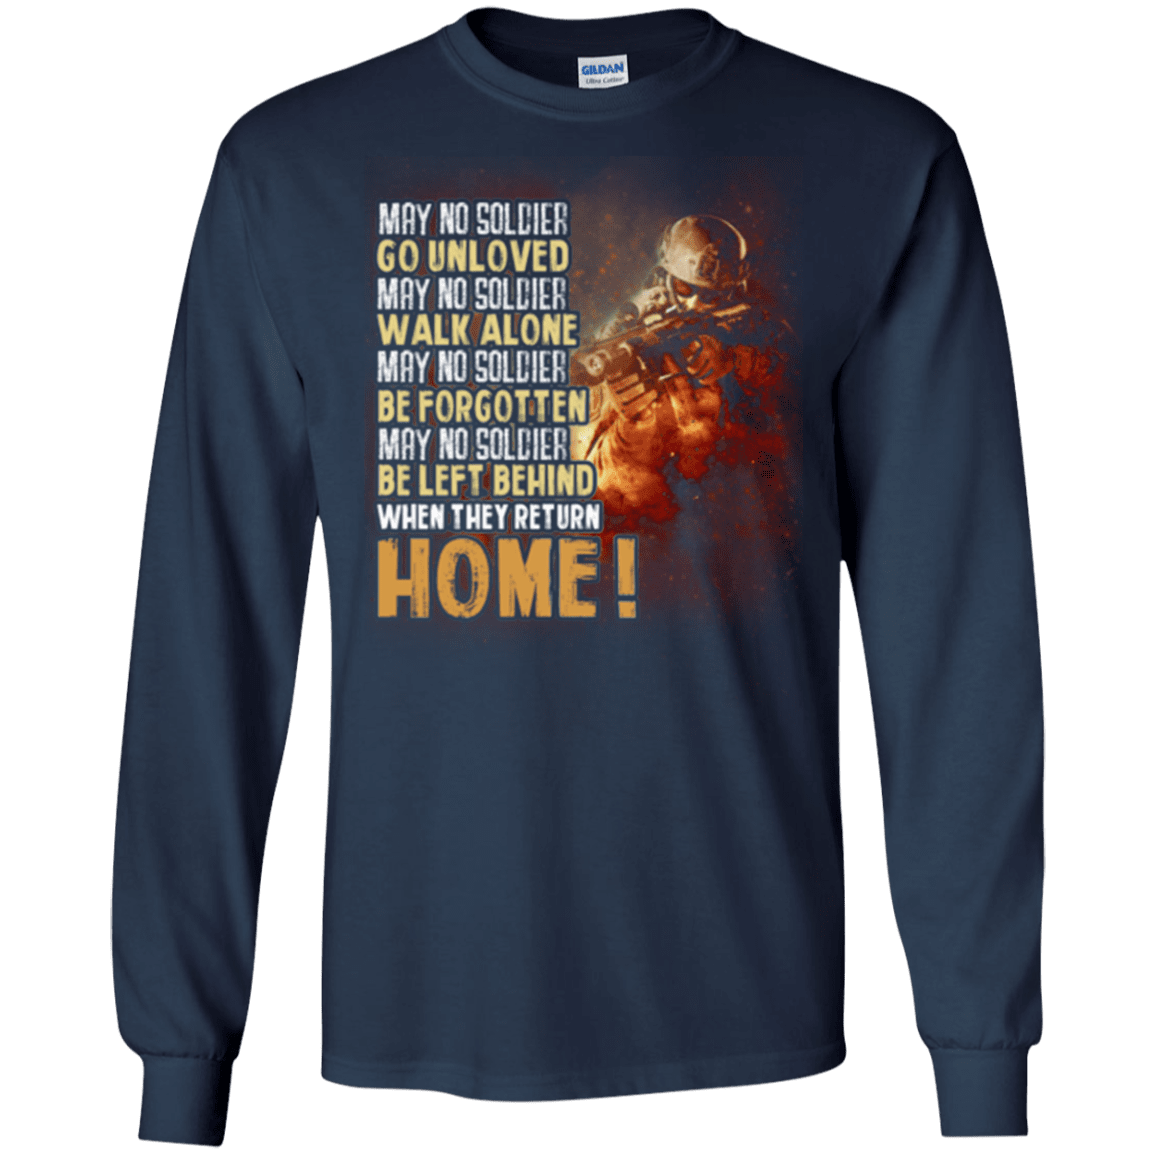 Military T-Shirt "Go Unloved, Walk Alone, Be Forgotten, Be Left Behind, Home"-TShirt-General-Veterans Nation